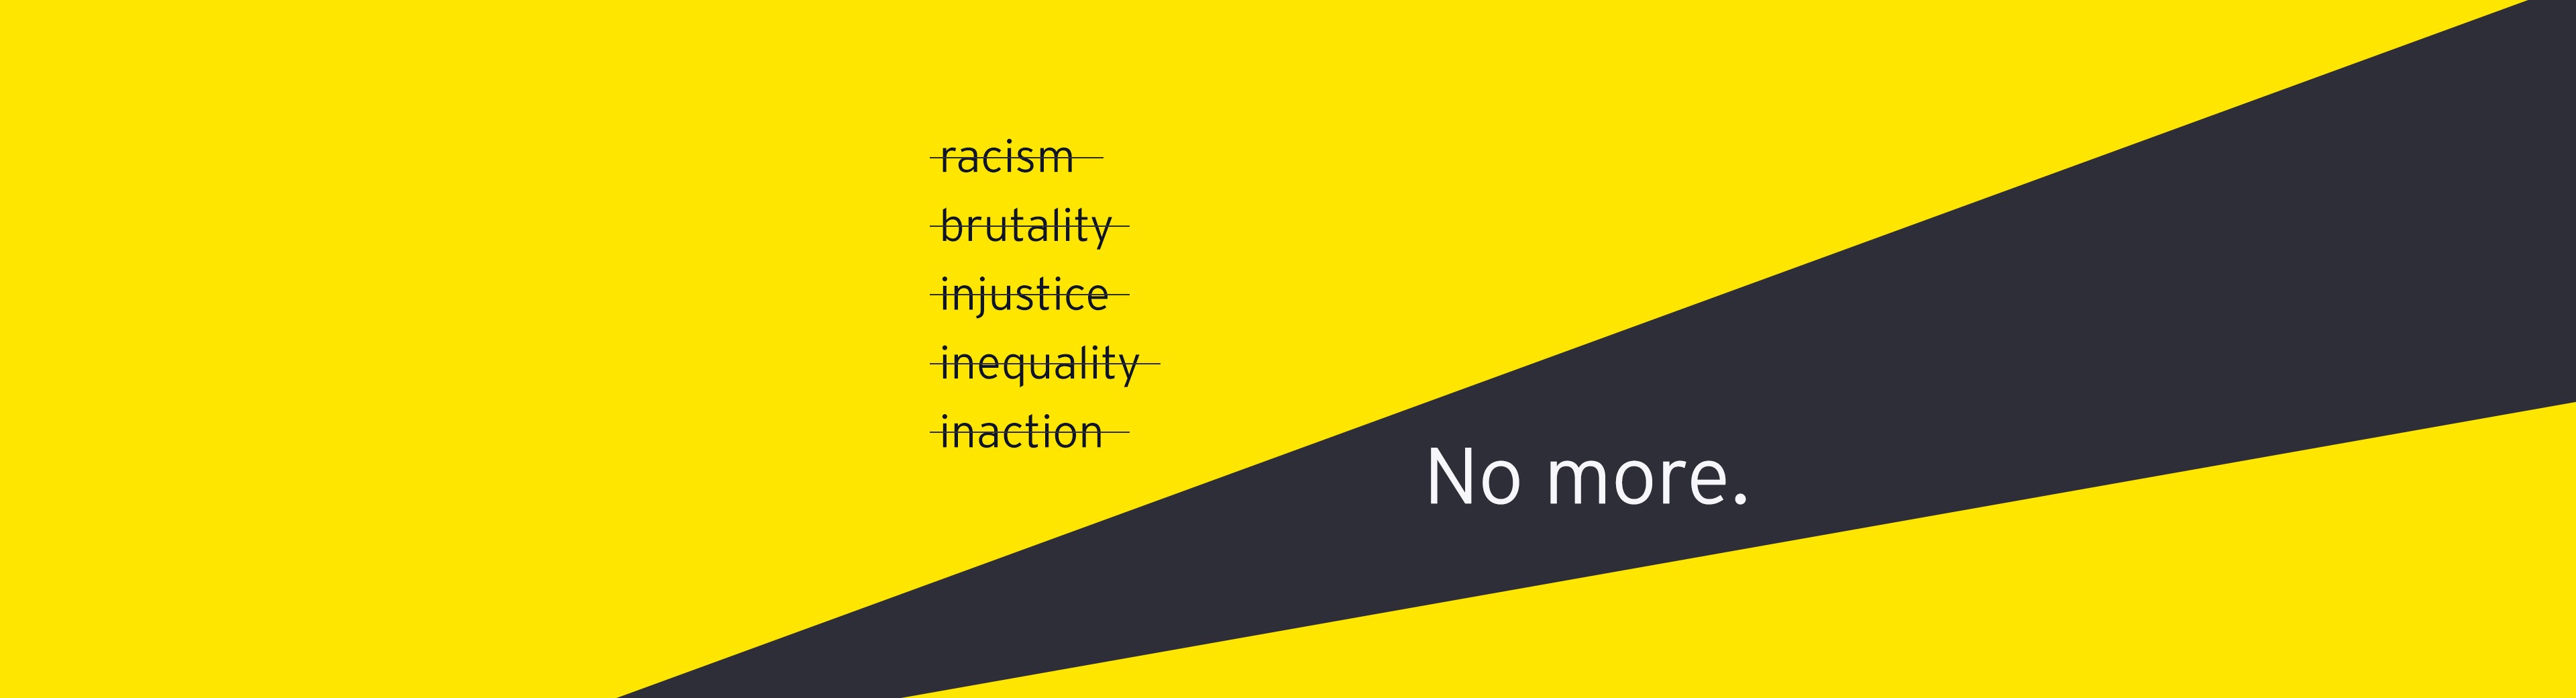 EY - EY anti-racism graphic showing the words racism, brutality, injustice, inequality and inaction crossed out next to the final sentence “No more.” 